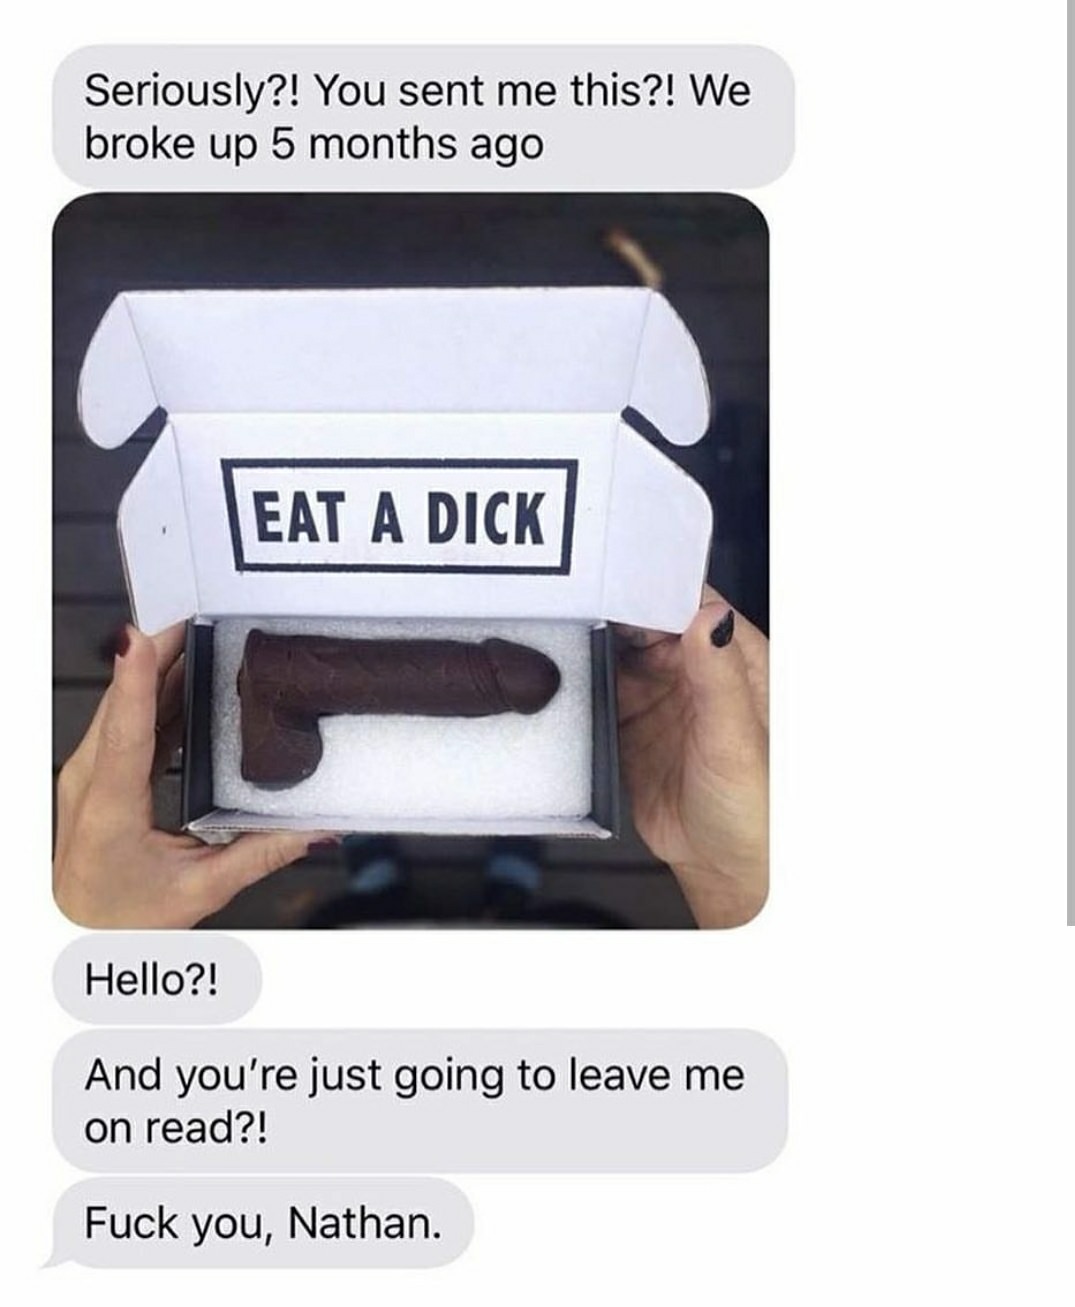 eat a dick chocolate meme - Seriously?! You sent me this?! We broke up 5 months ago Eat A Dick Hello?! And you're just going to leave me on read?! Fuck you, Nathan.